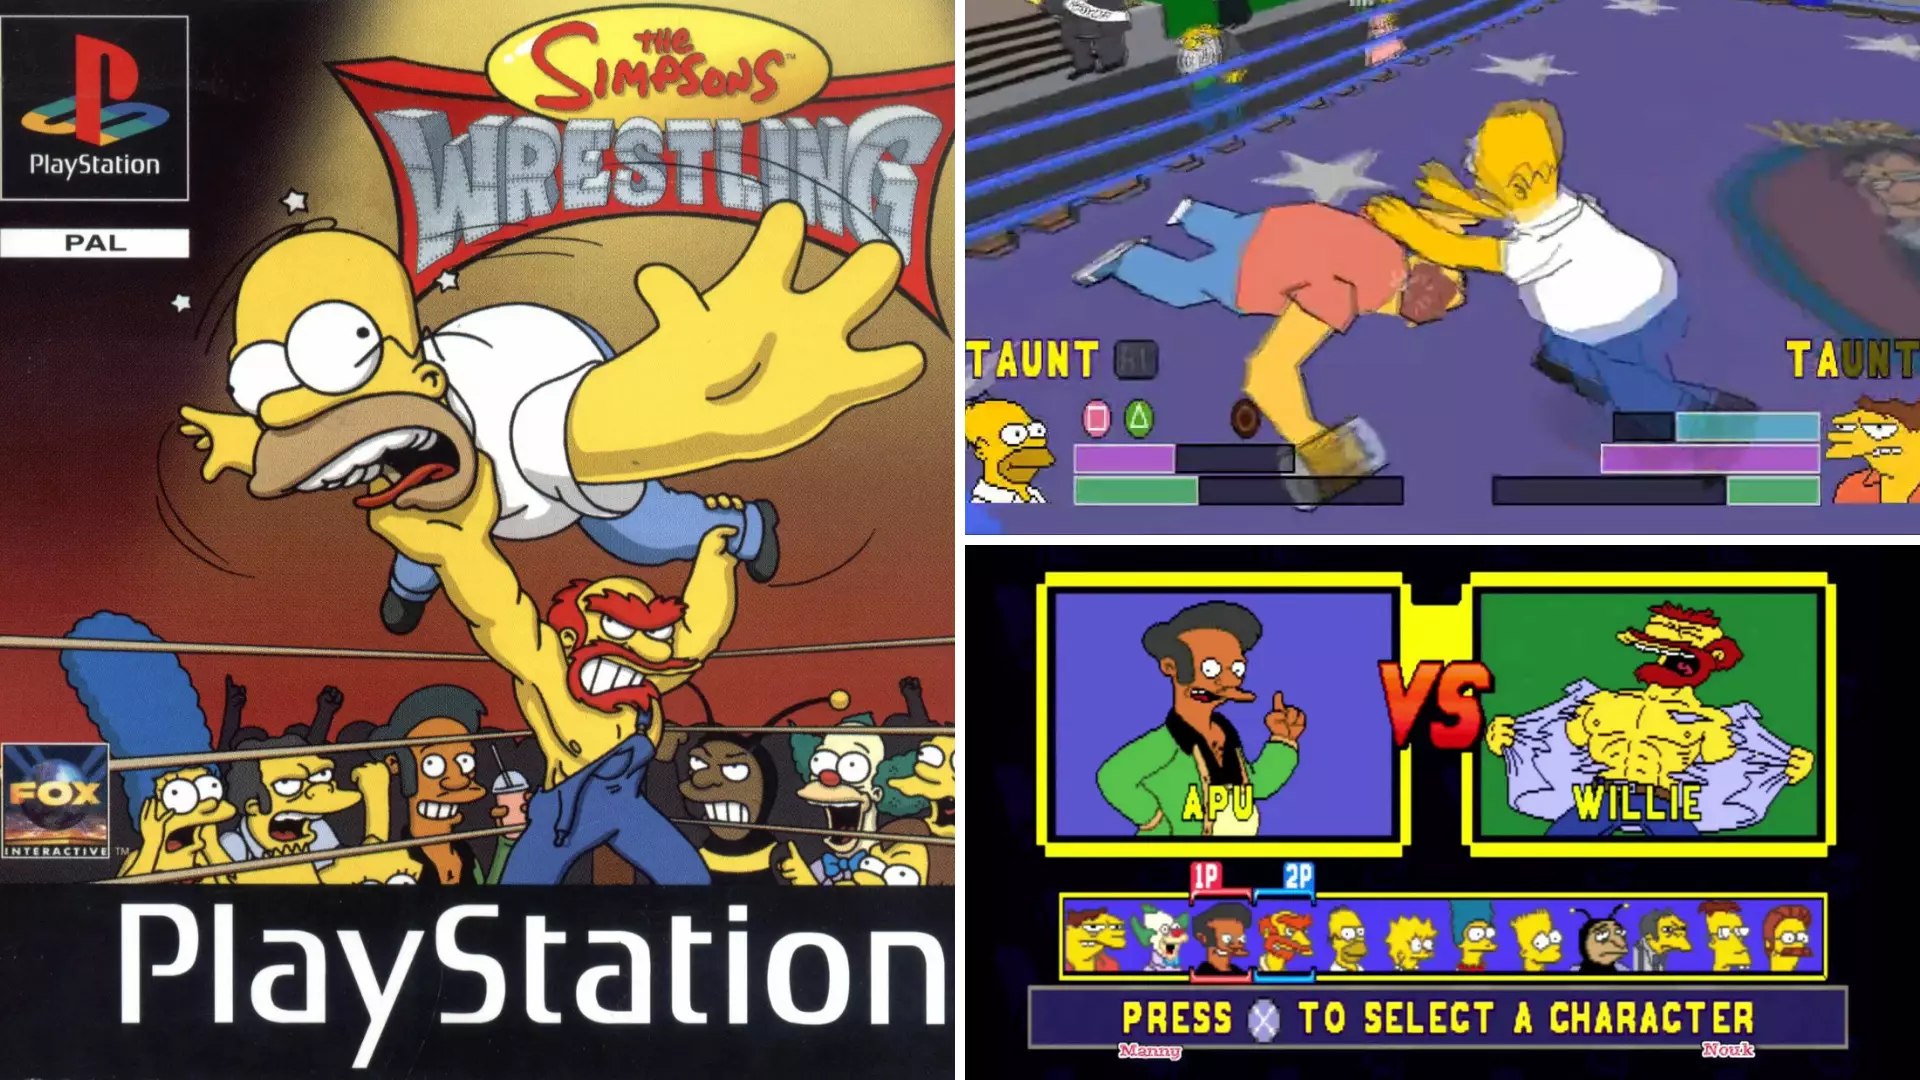 The Simpsons Wrestling Is Officially 20 Years Old And We Feel Really Old Now